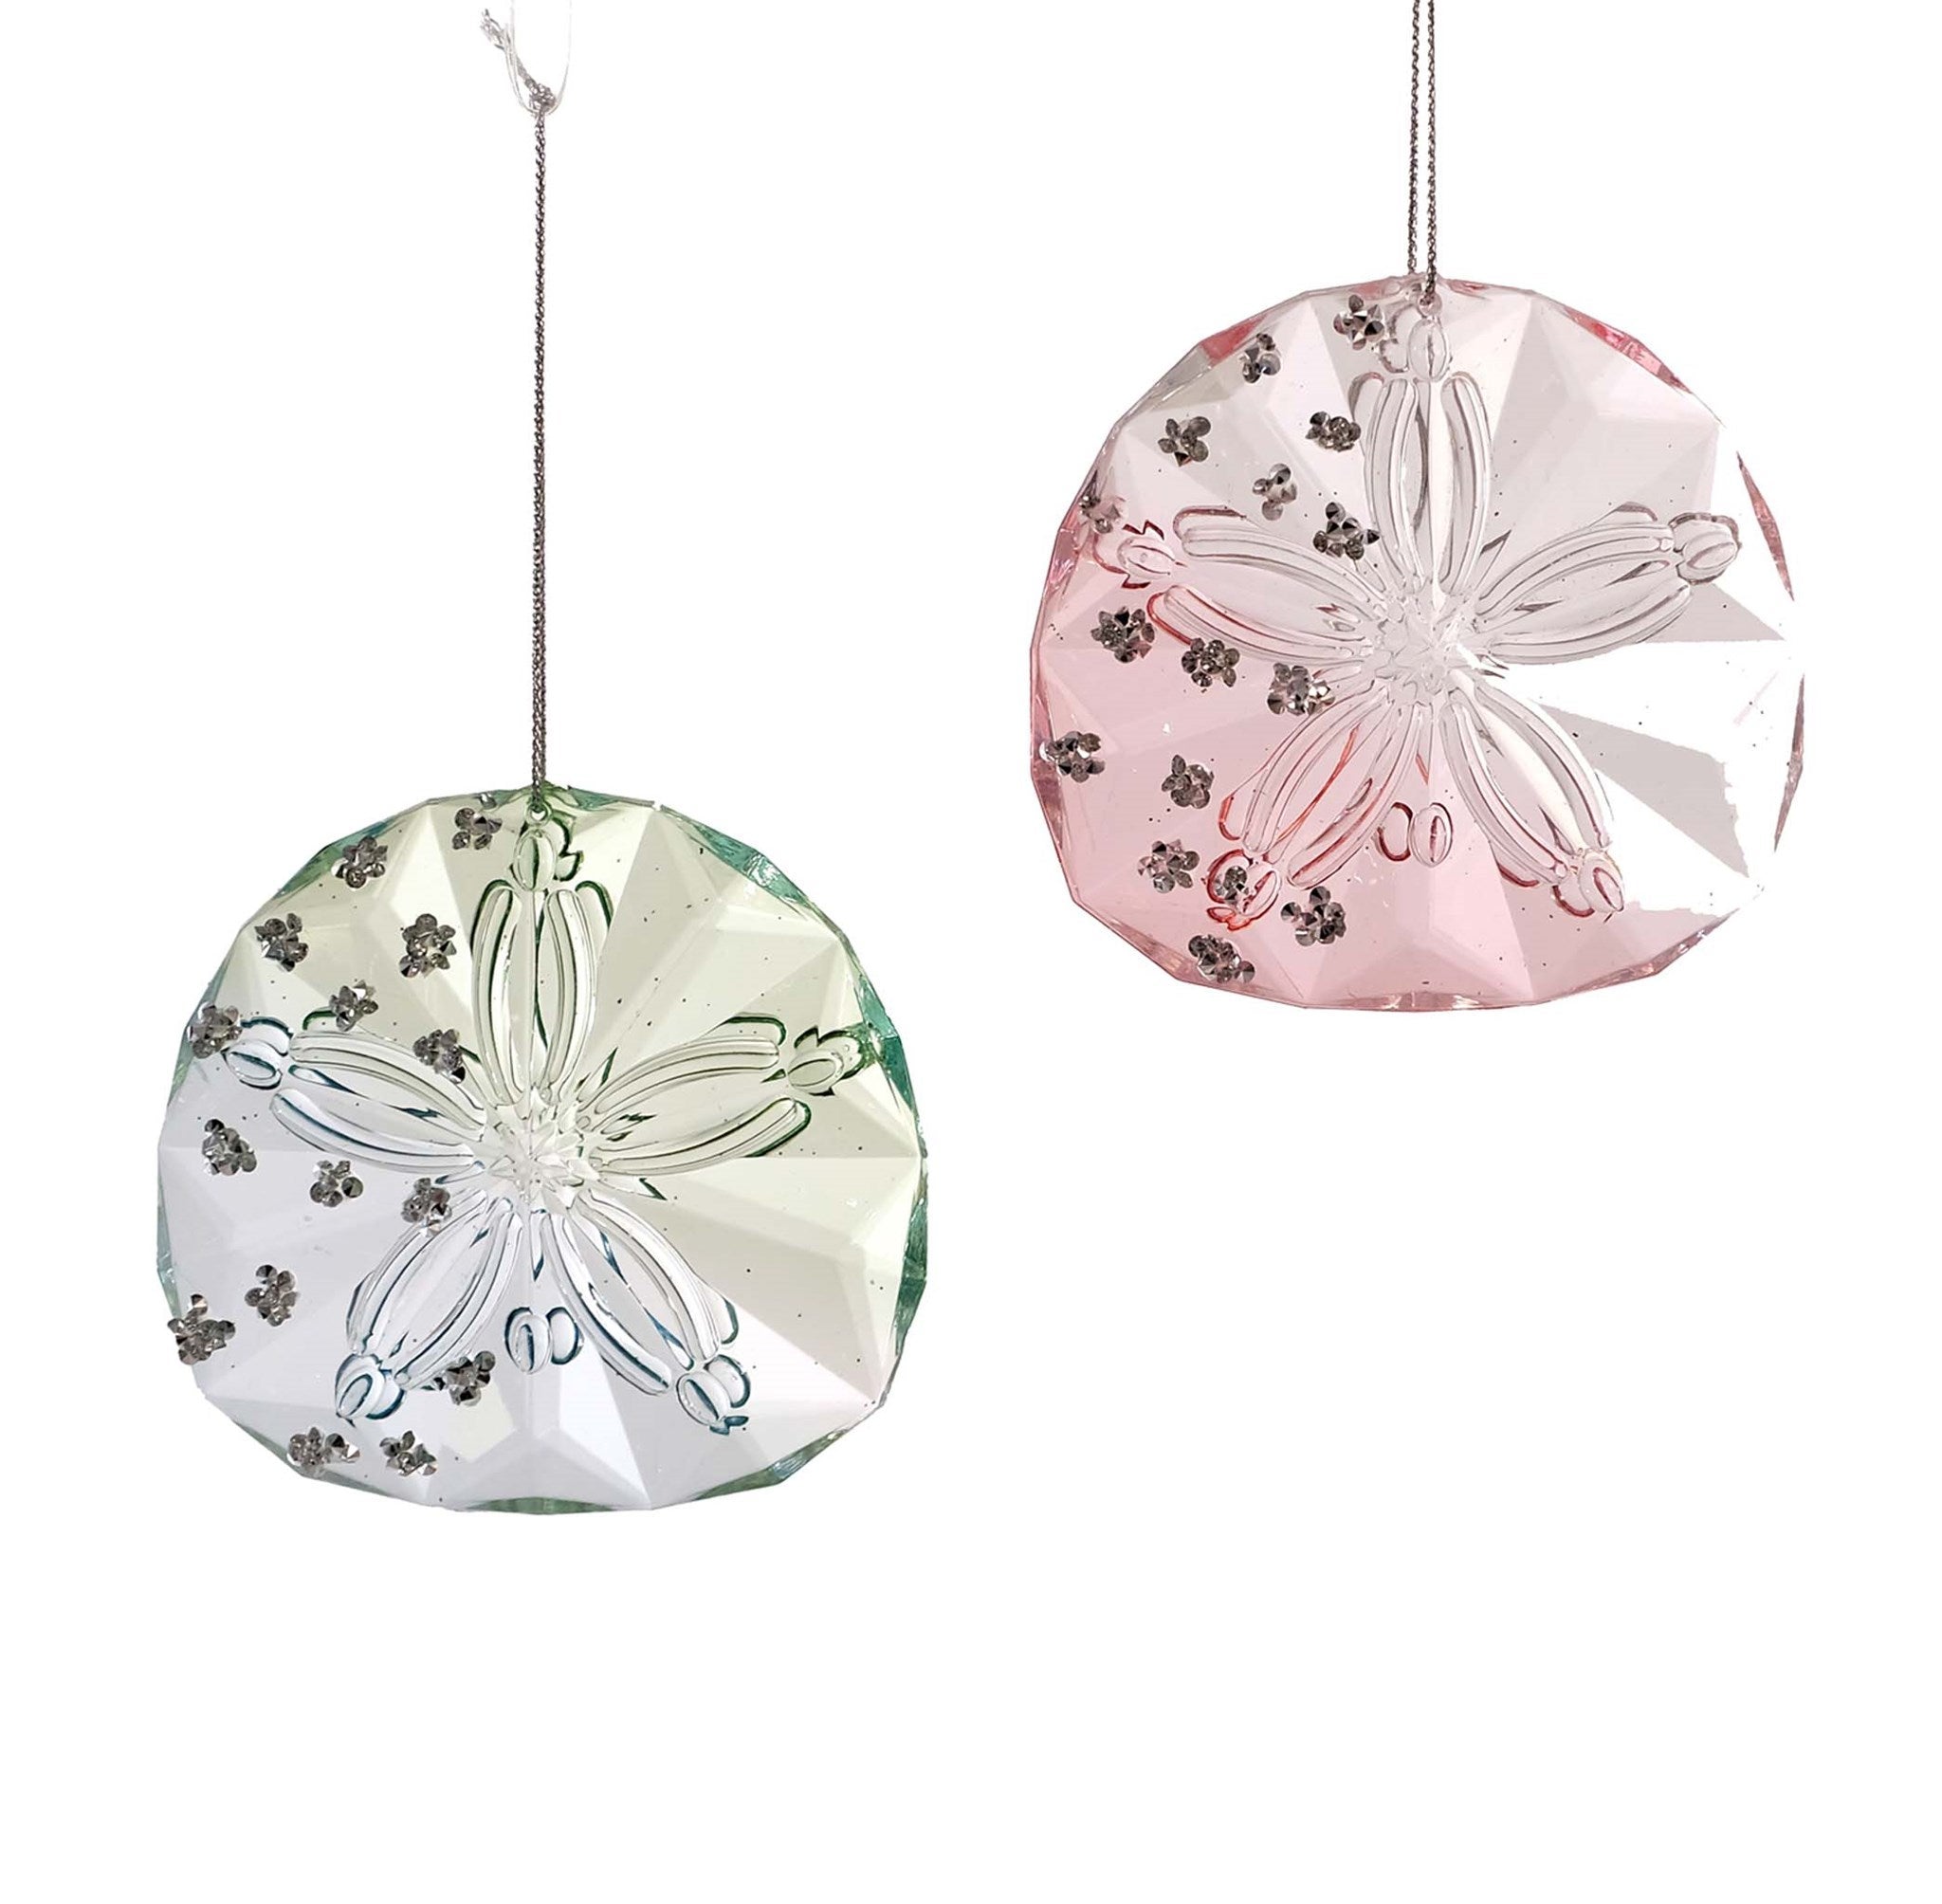 Sea Crystal Sand Dollar Ornaments by Katherine's Collection